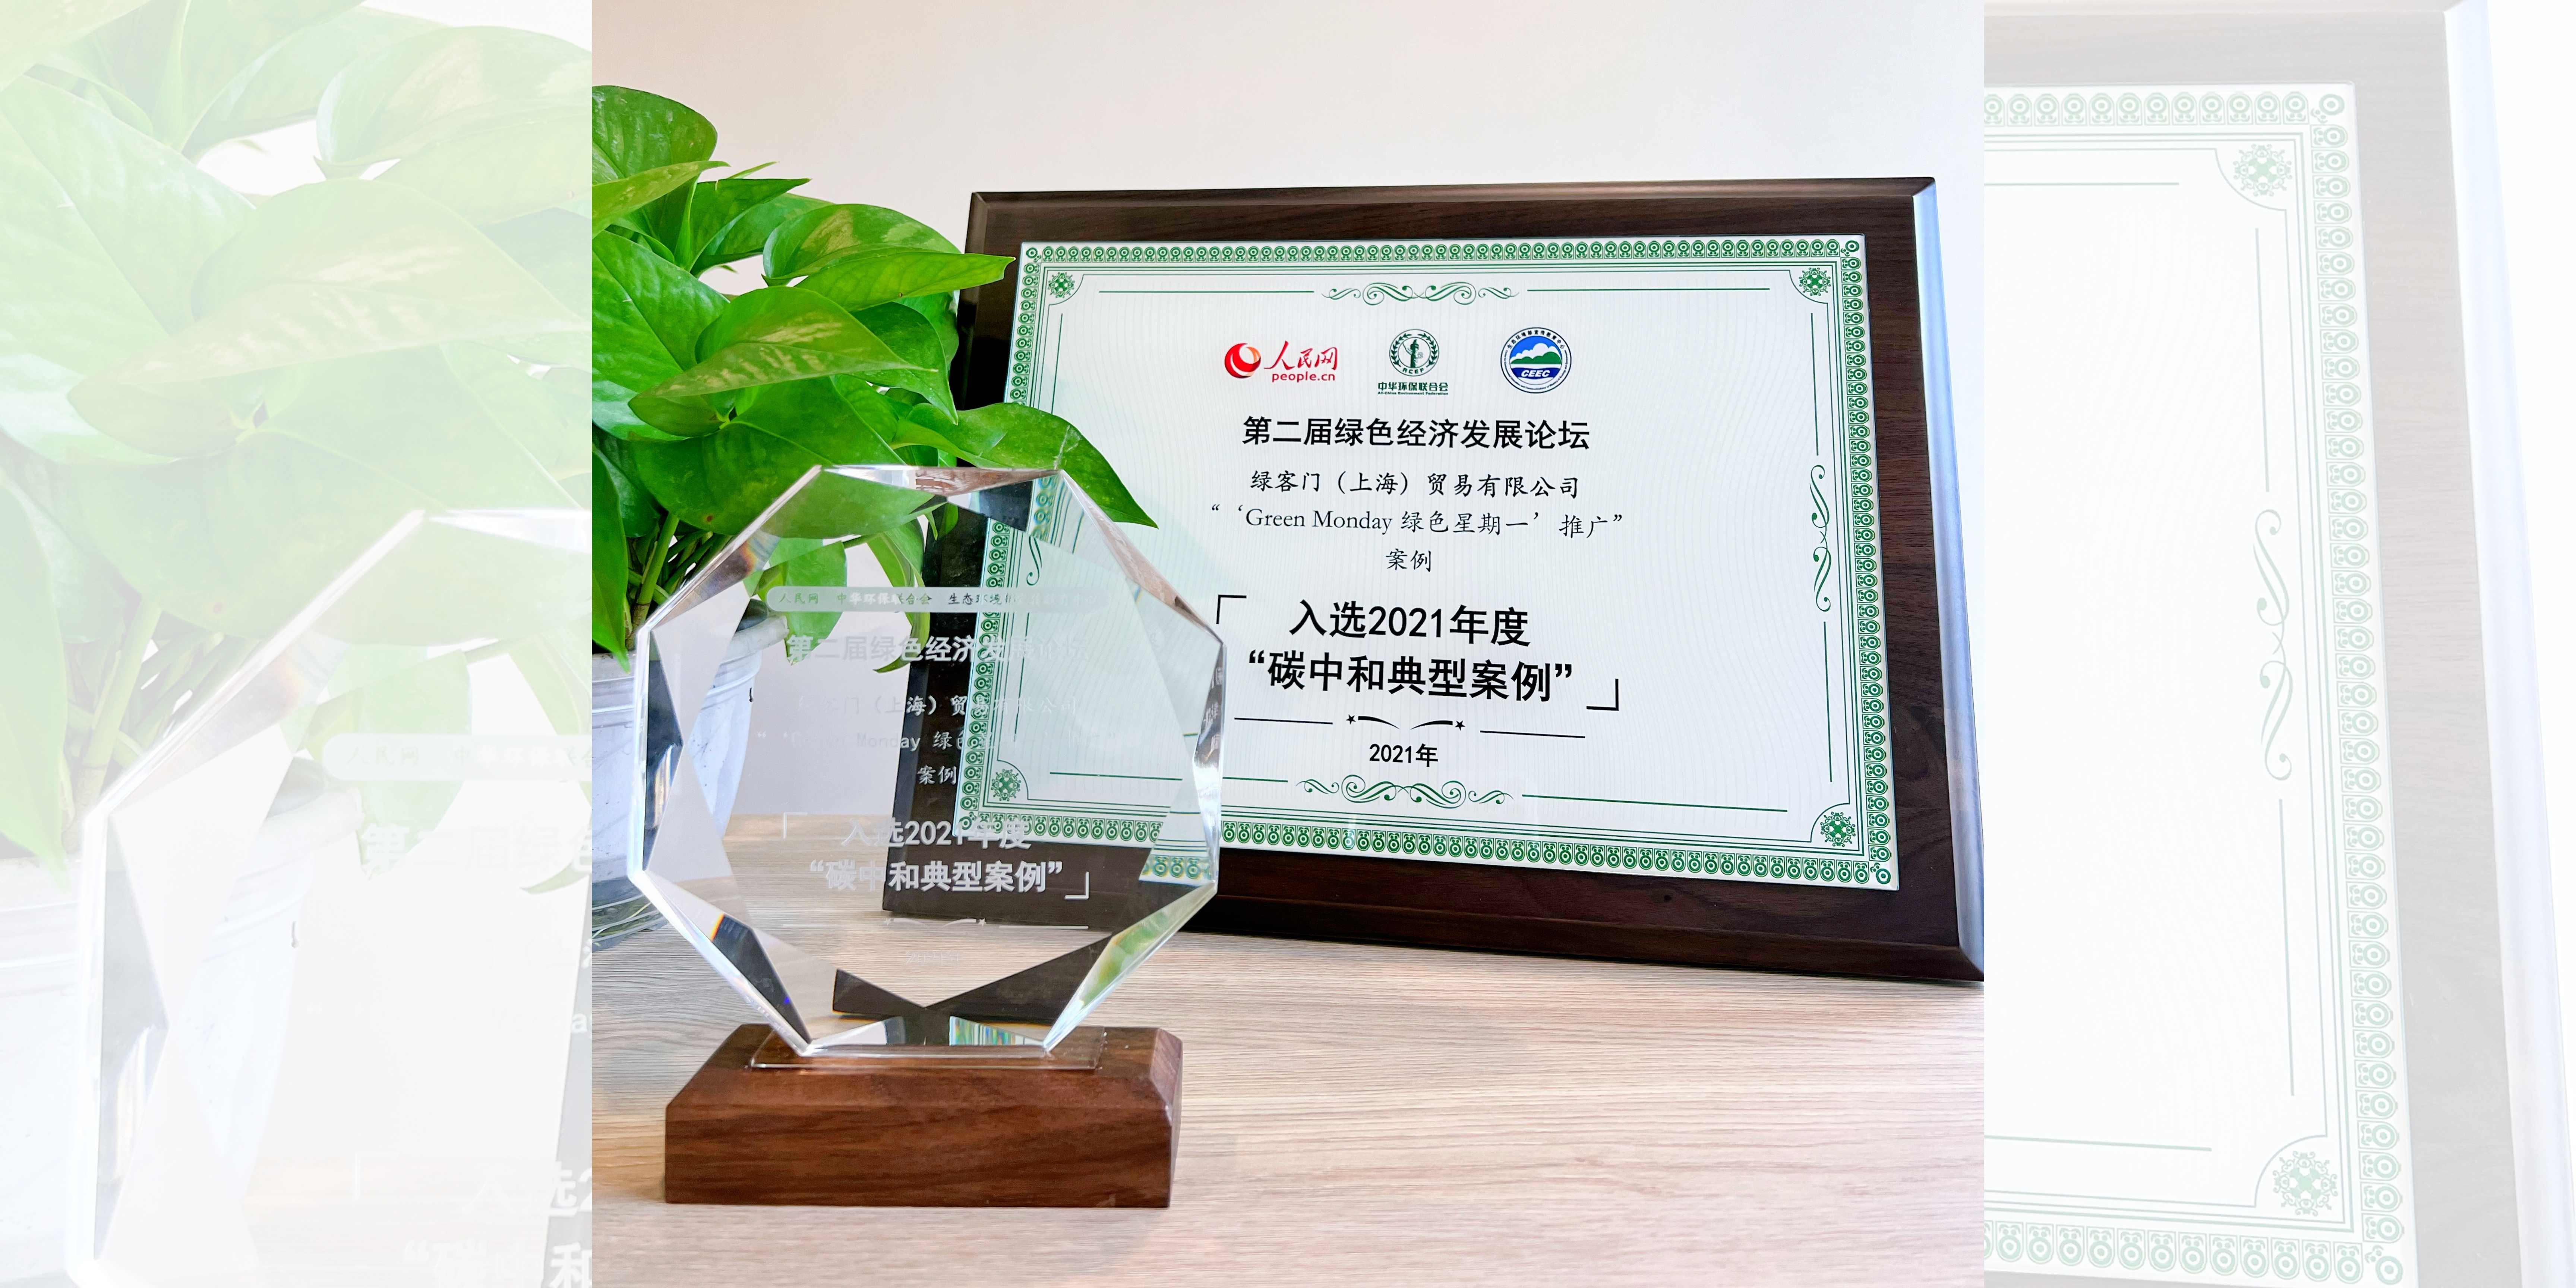 Green Monday Movement Selected As One of The “Best Practices For Carbon Neutrality”  Recognised As A Model Of Promoting Quality Green Development And Building A Sustainable Future